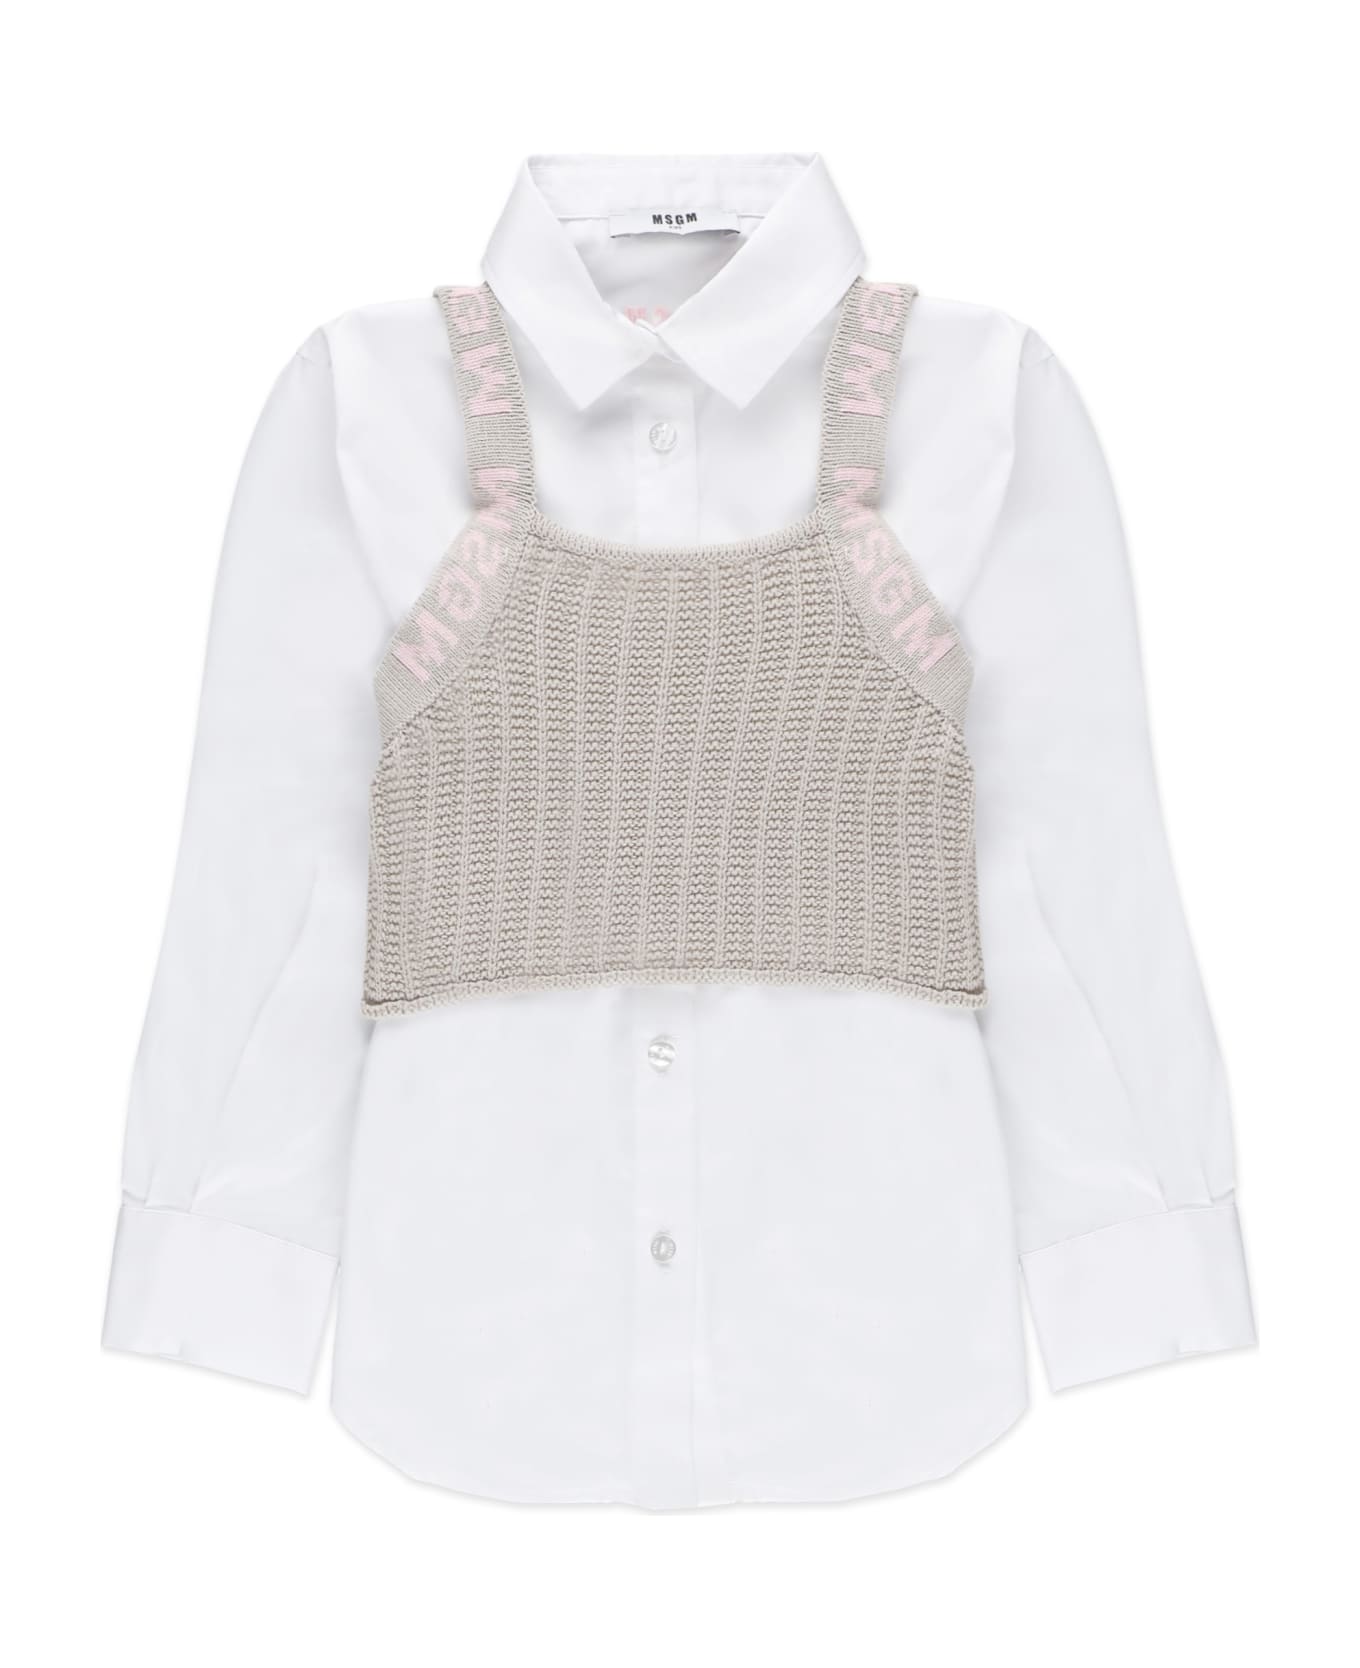 MSGM Cotton Shirt With Top - White